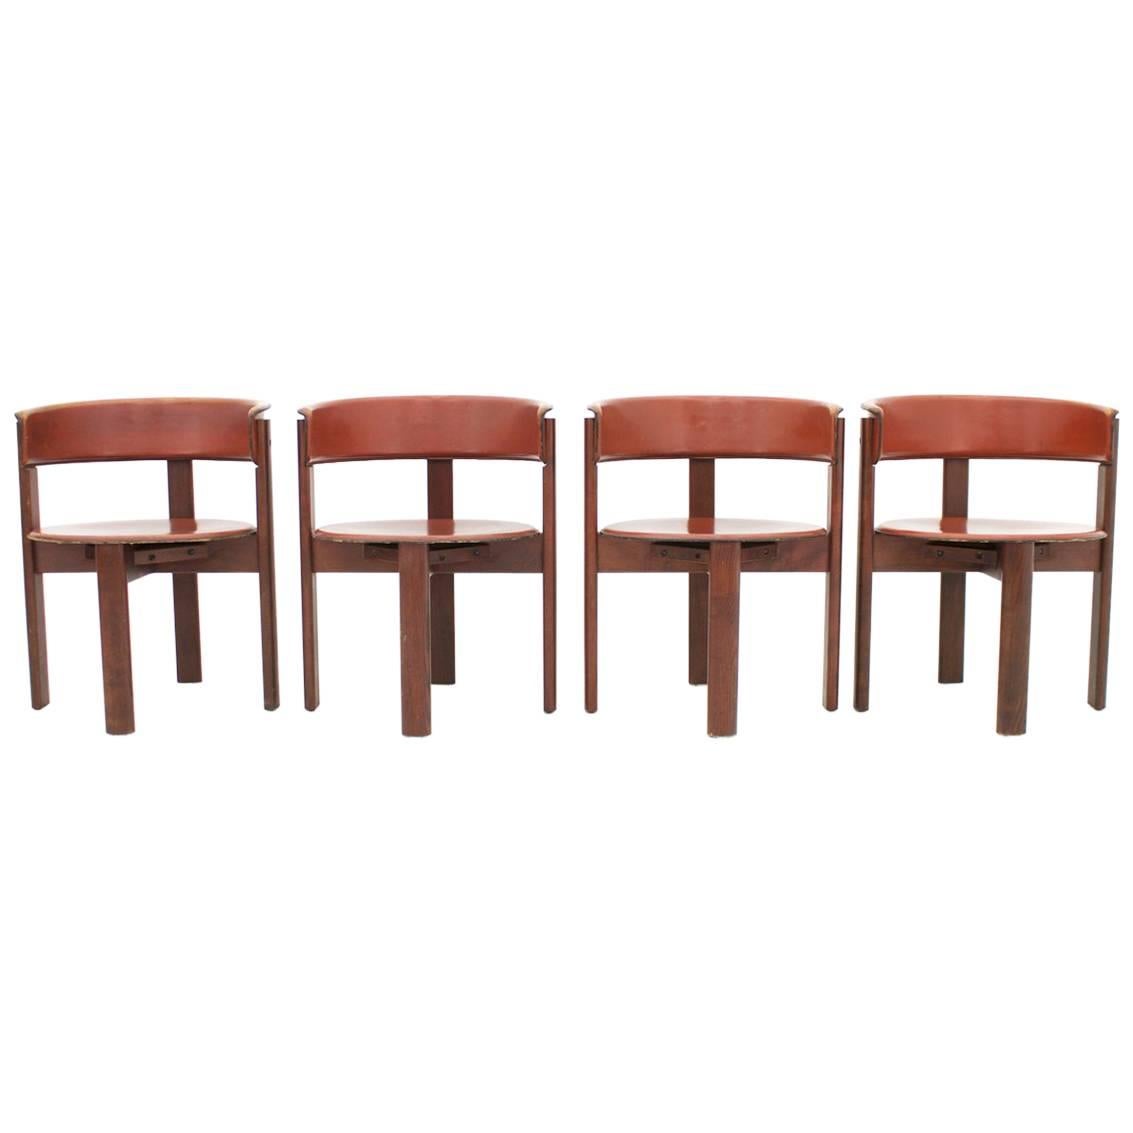 Set of Four Cassina Dining Room Chairs in Red Leather Italy, 1970s